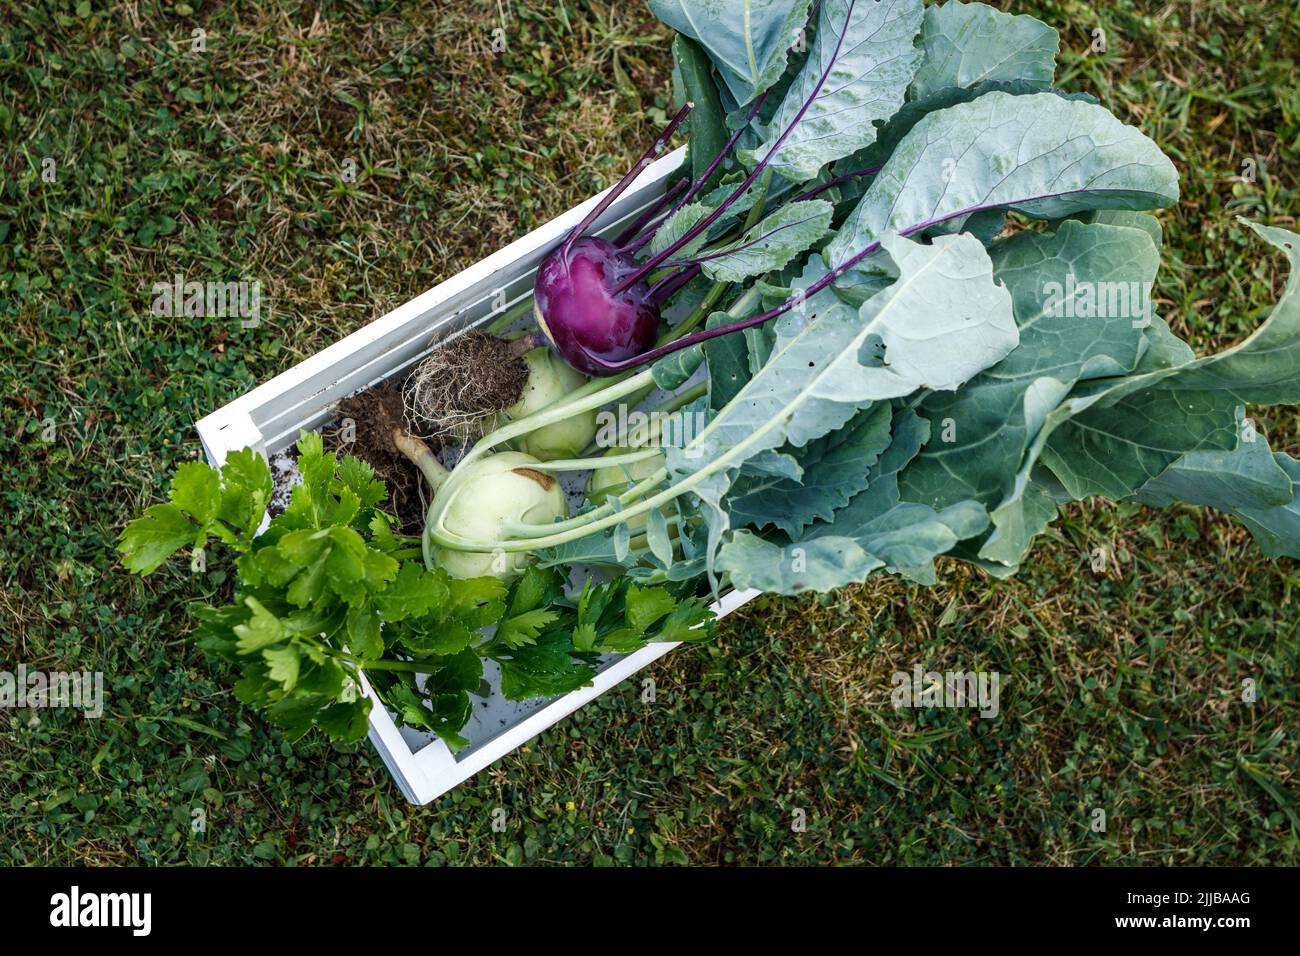 Harvested vegetable. Kohlrabi and celery leaves from the organic garden. White wooden box with homegrown vegetables Stock Photo